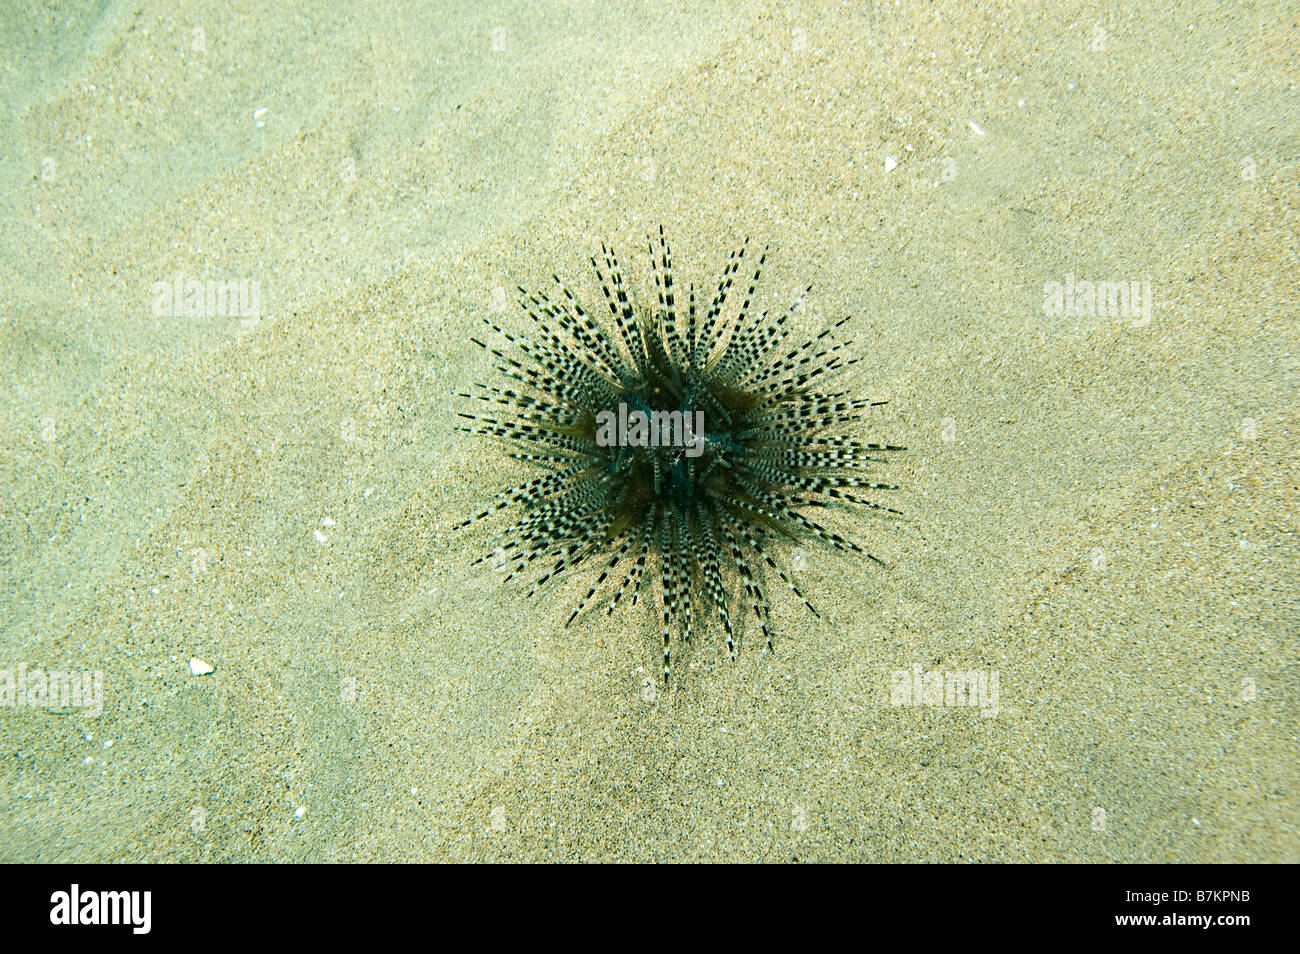 single banded black and white urchin in sand Stock Photo